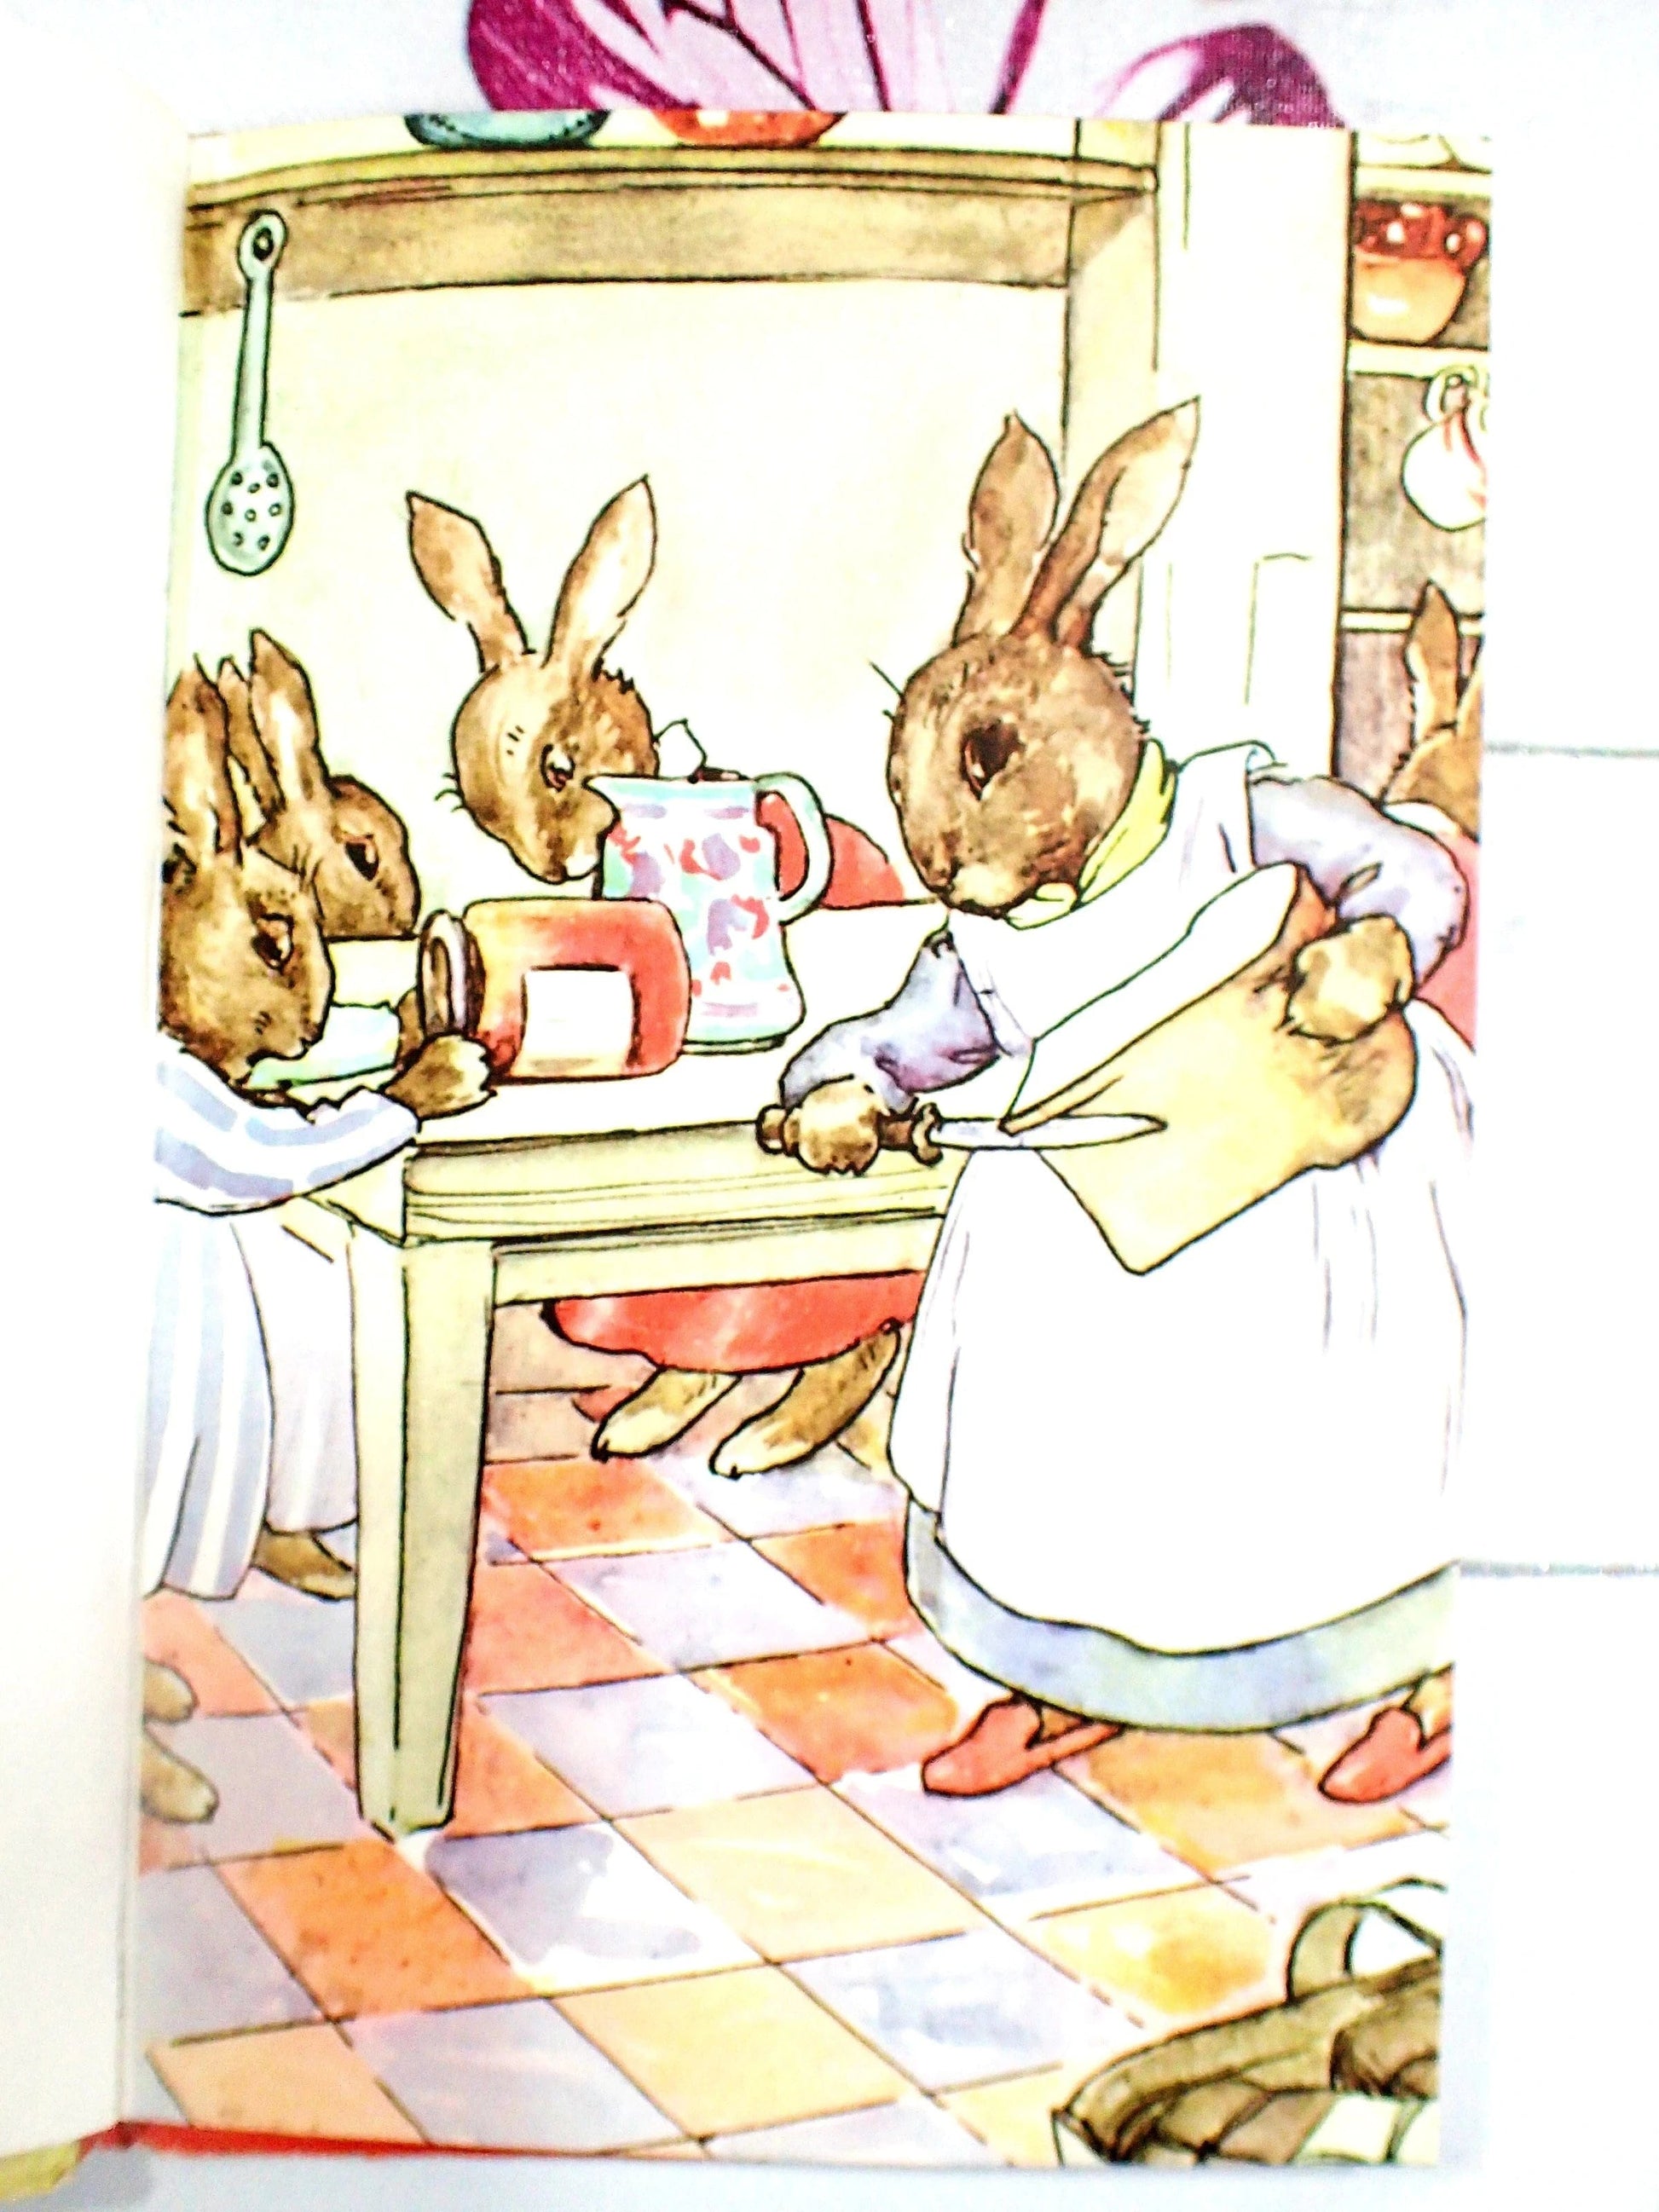 Mrs Bunnikin holding a loaf of bread and bunnies holding a jampot.